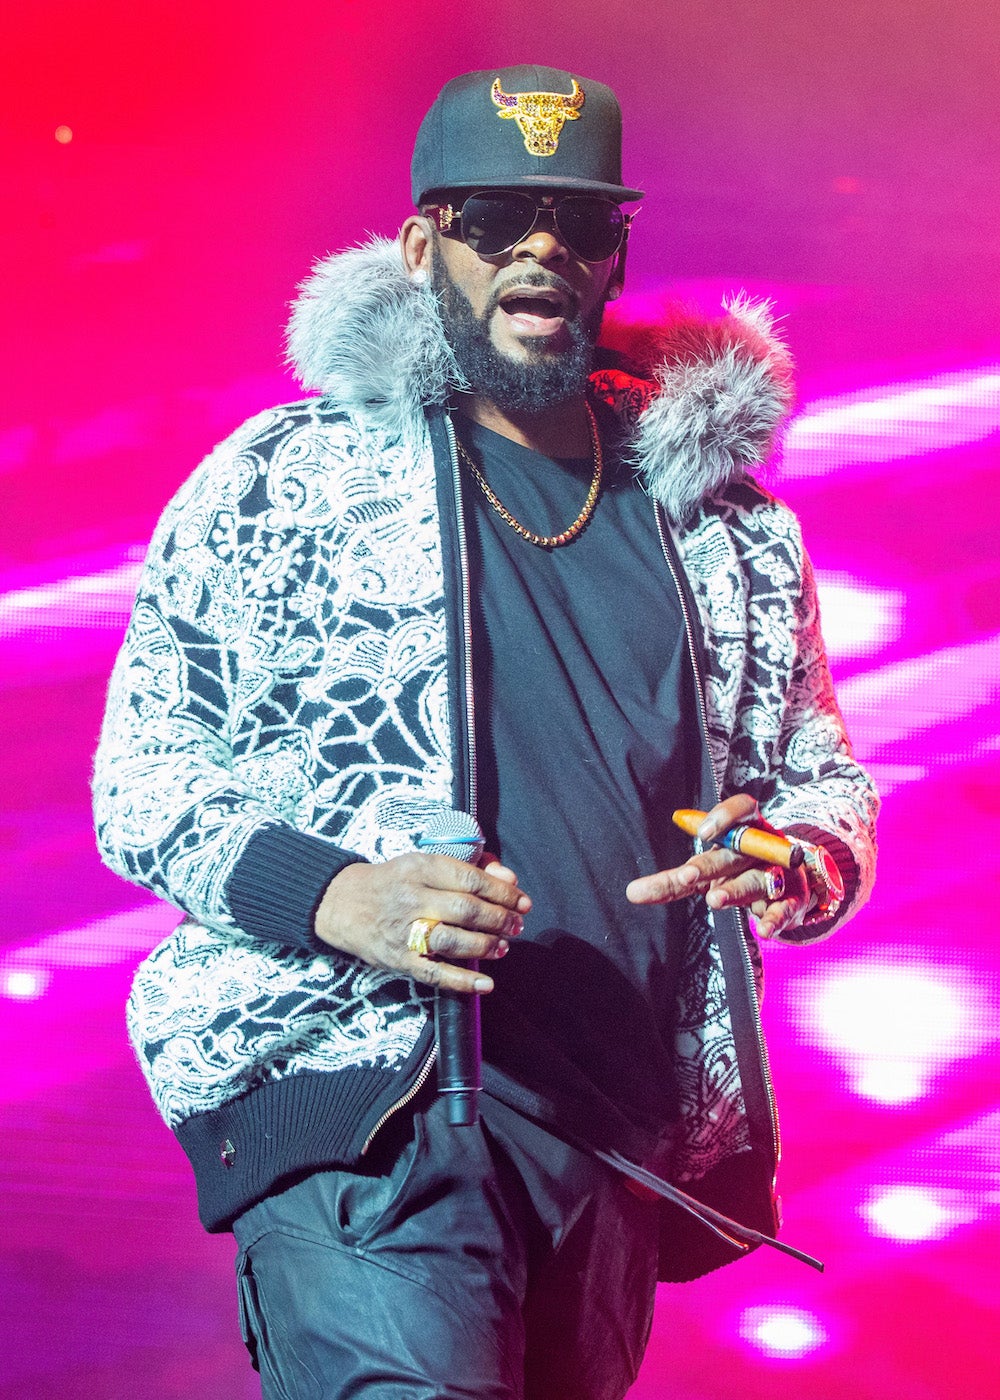 Pandora, Apple Music Join Spotify In Pulling R. Kelly's Music From ...